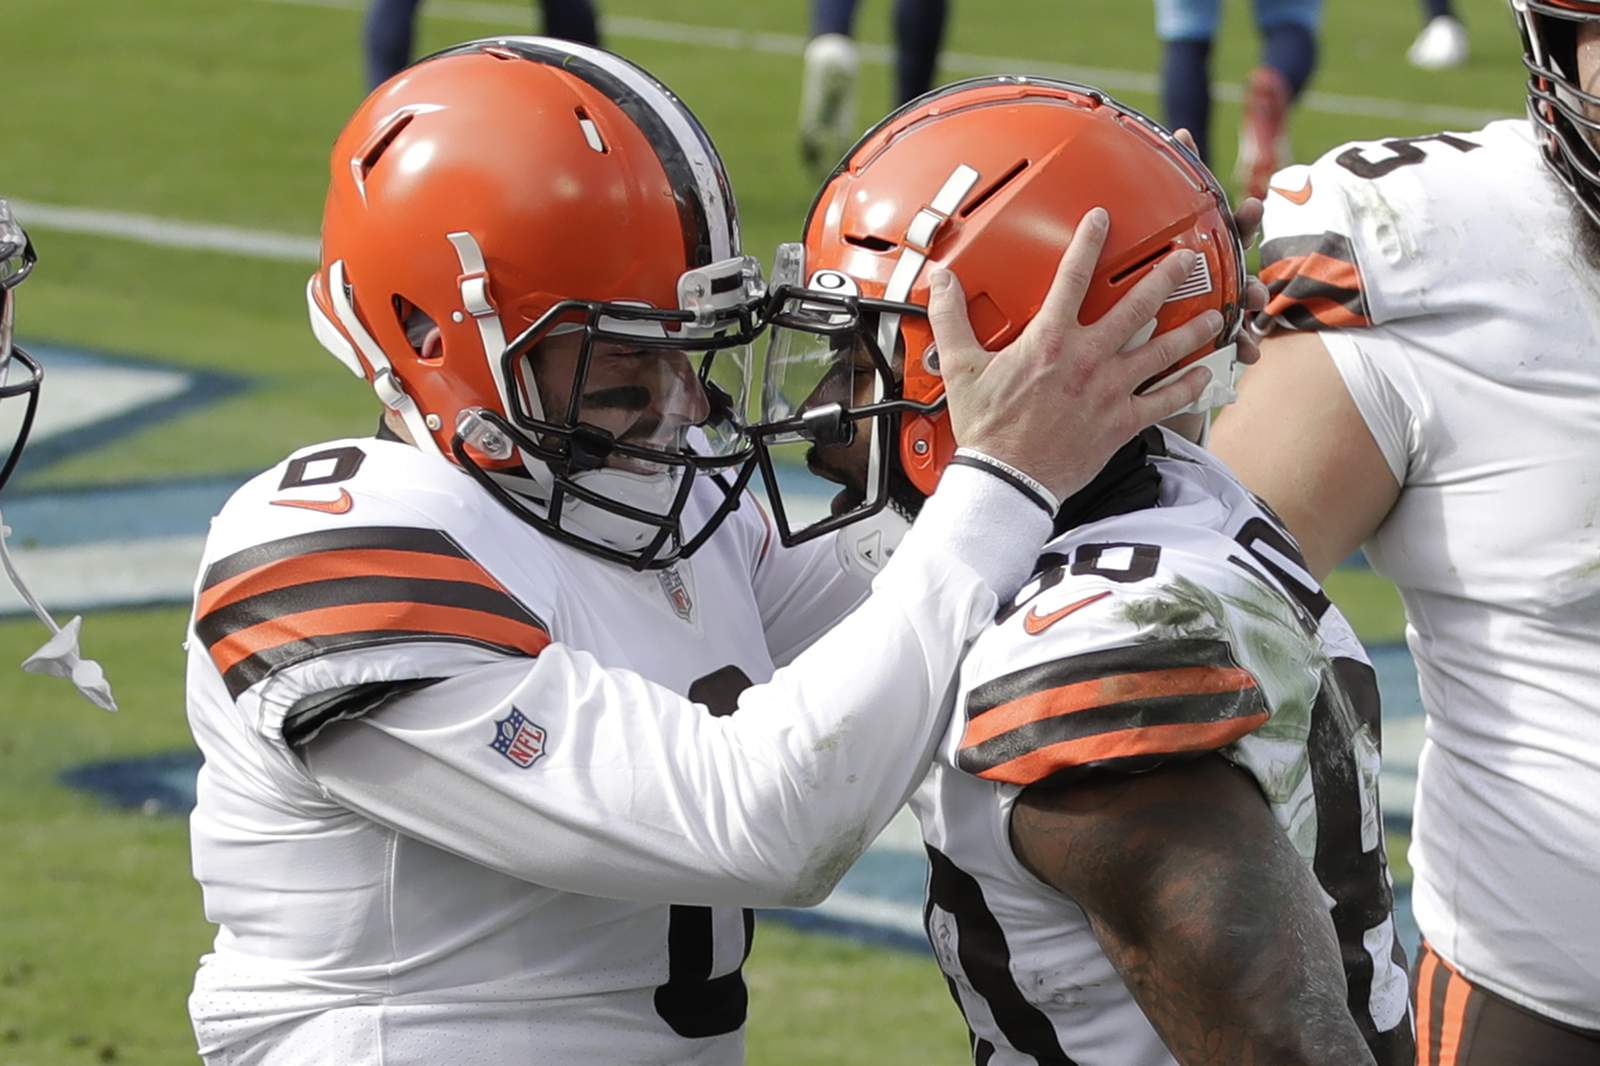 Mayfield throws 4 TDs in 1st half, Browns beat Titans 41-35